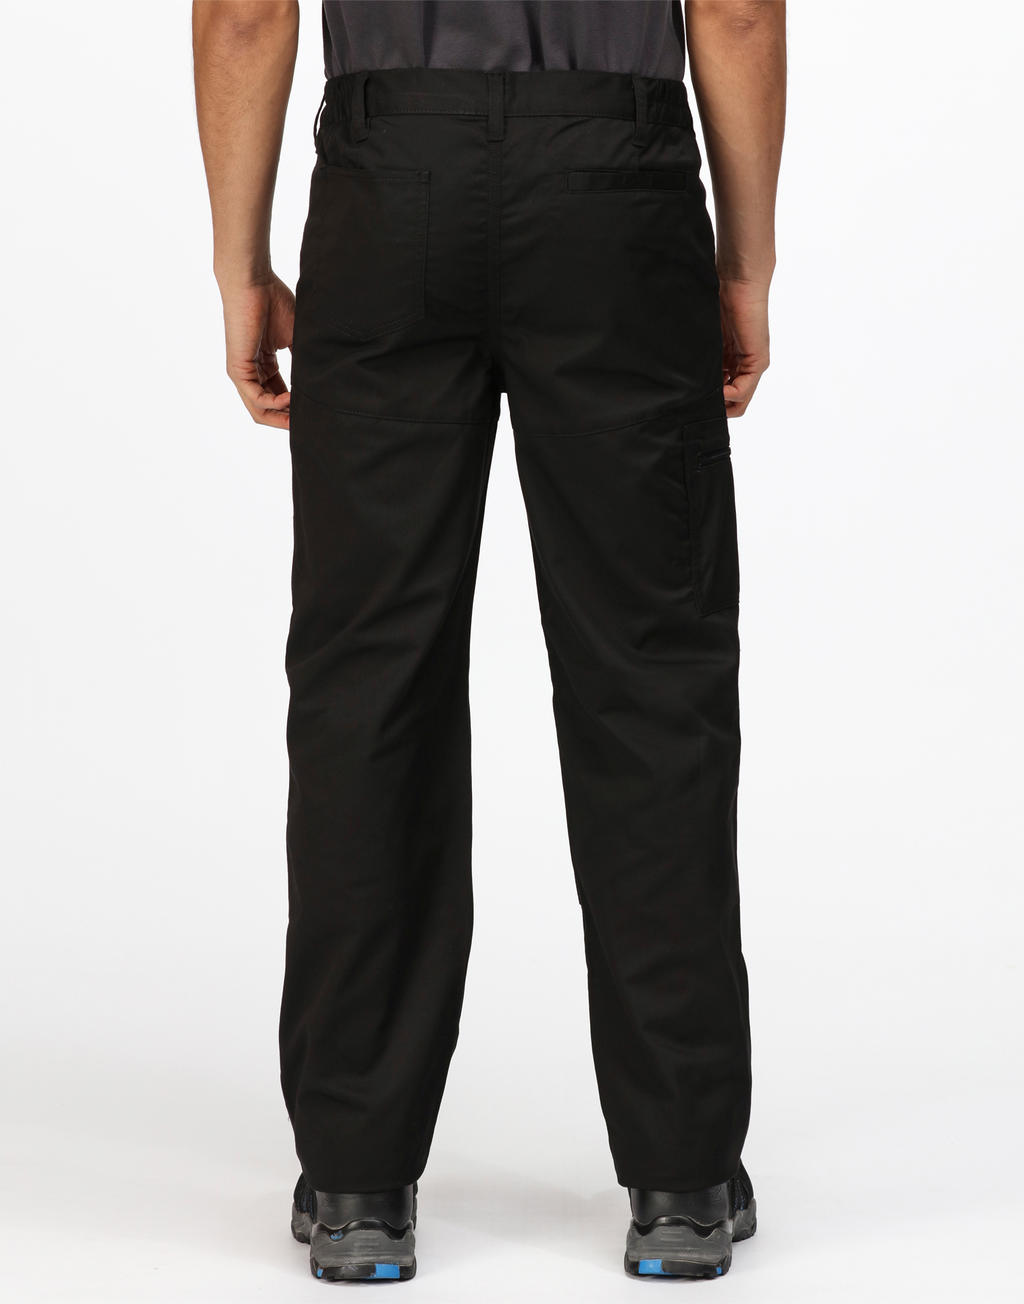  Pro Action Trousers (Long) in Farbe Black